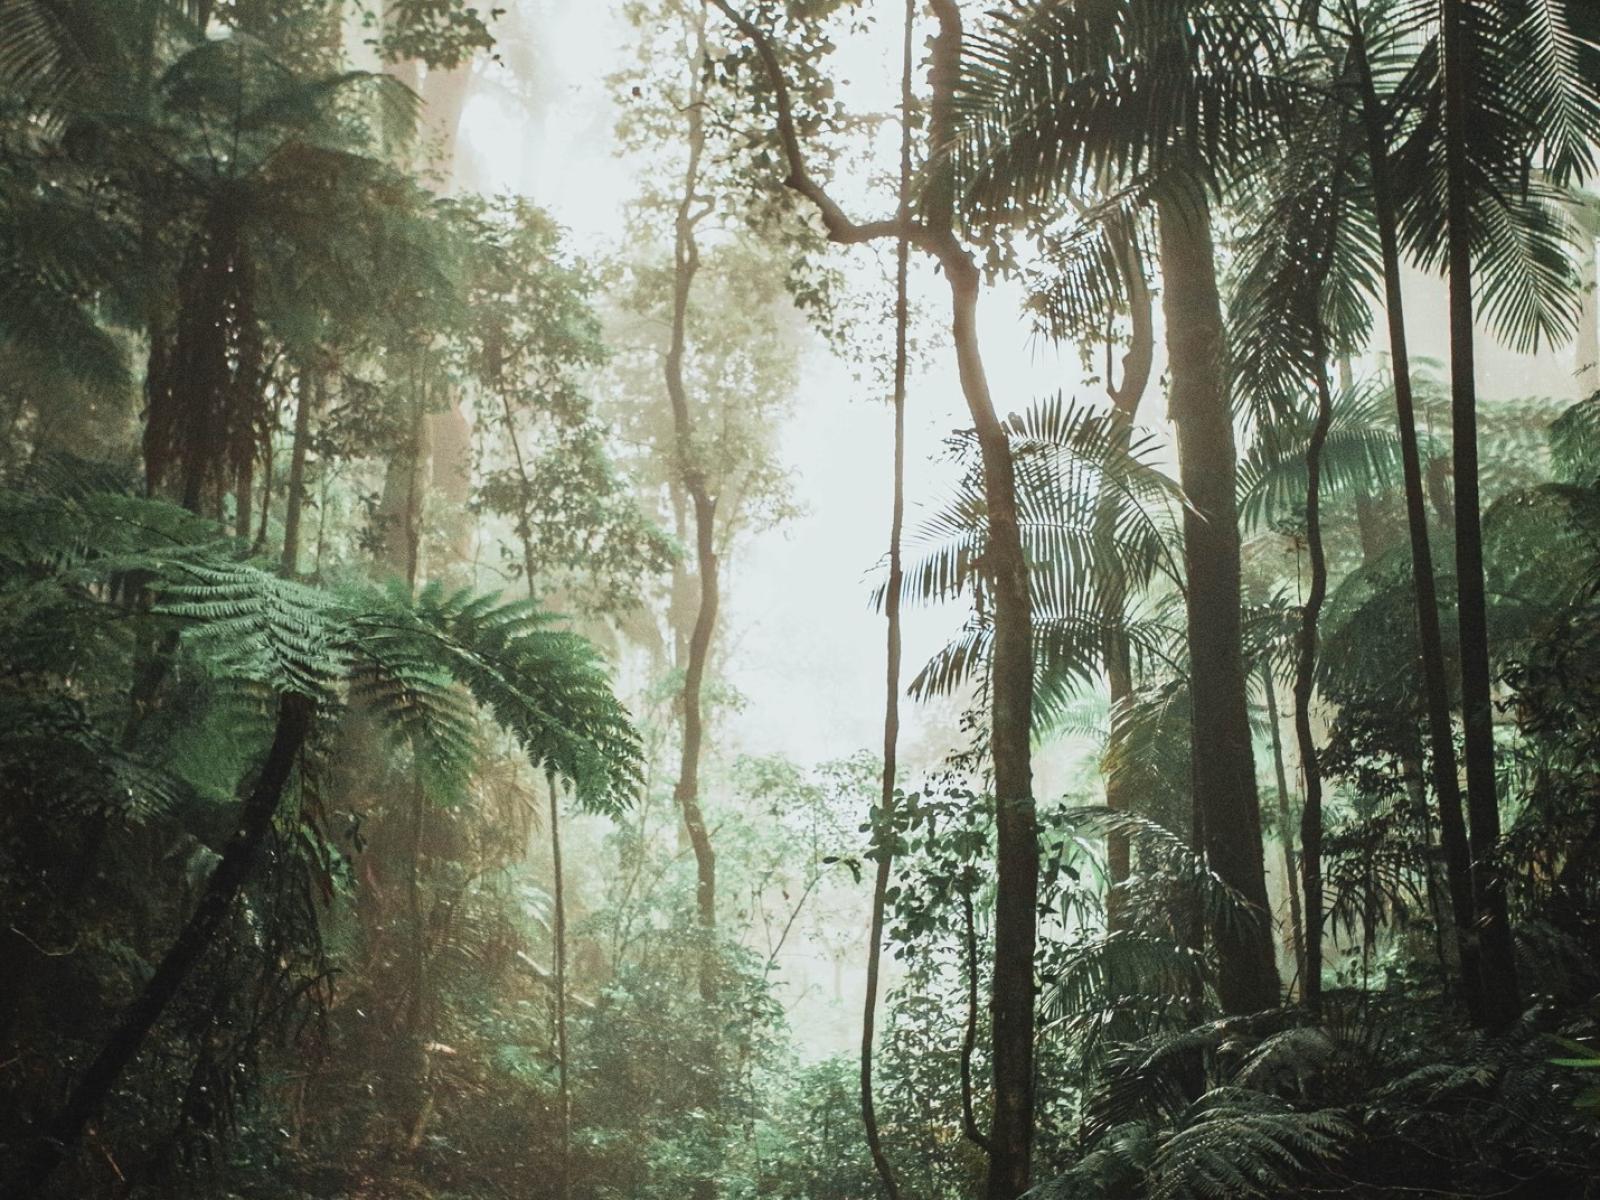 Photograph of a tropical forest with lots of different types of plants growing together.